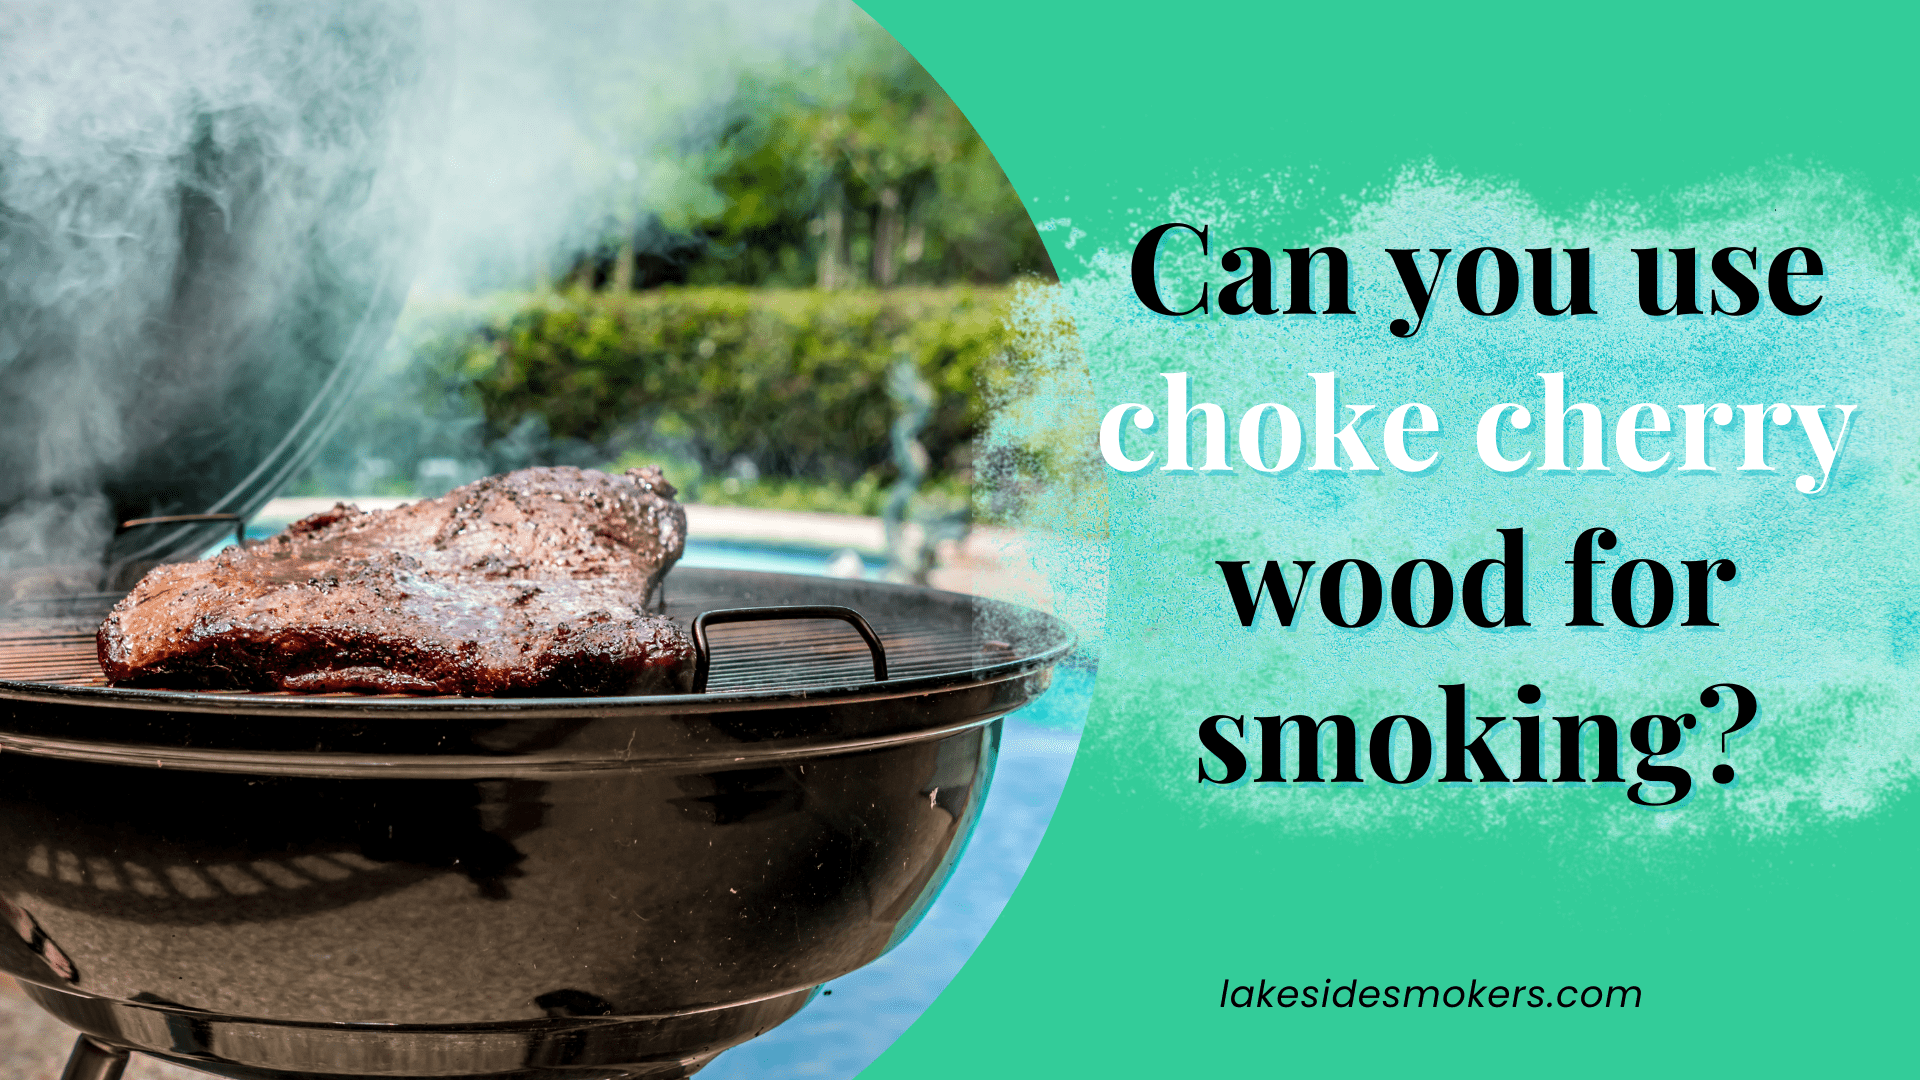 Can you use chokecherry wood for smoking? It certainly works, but in moderation